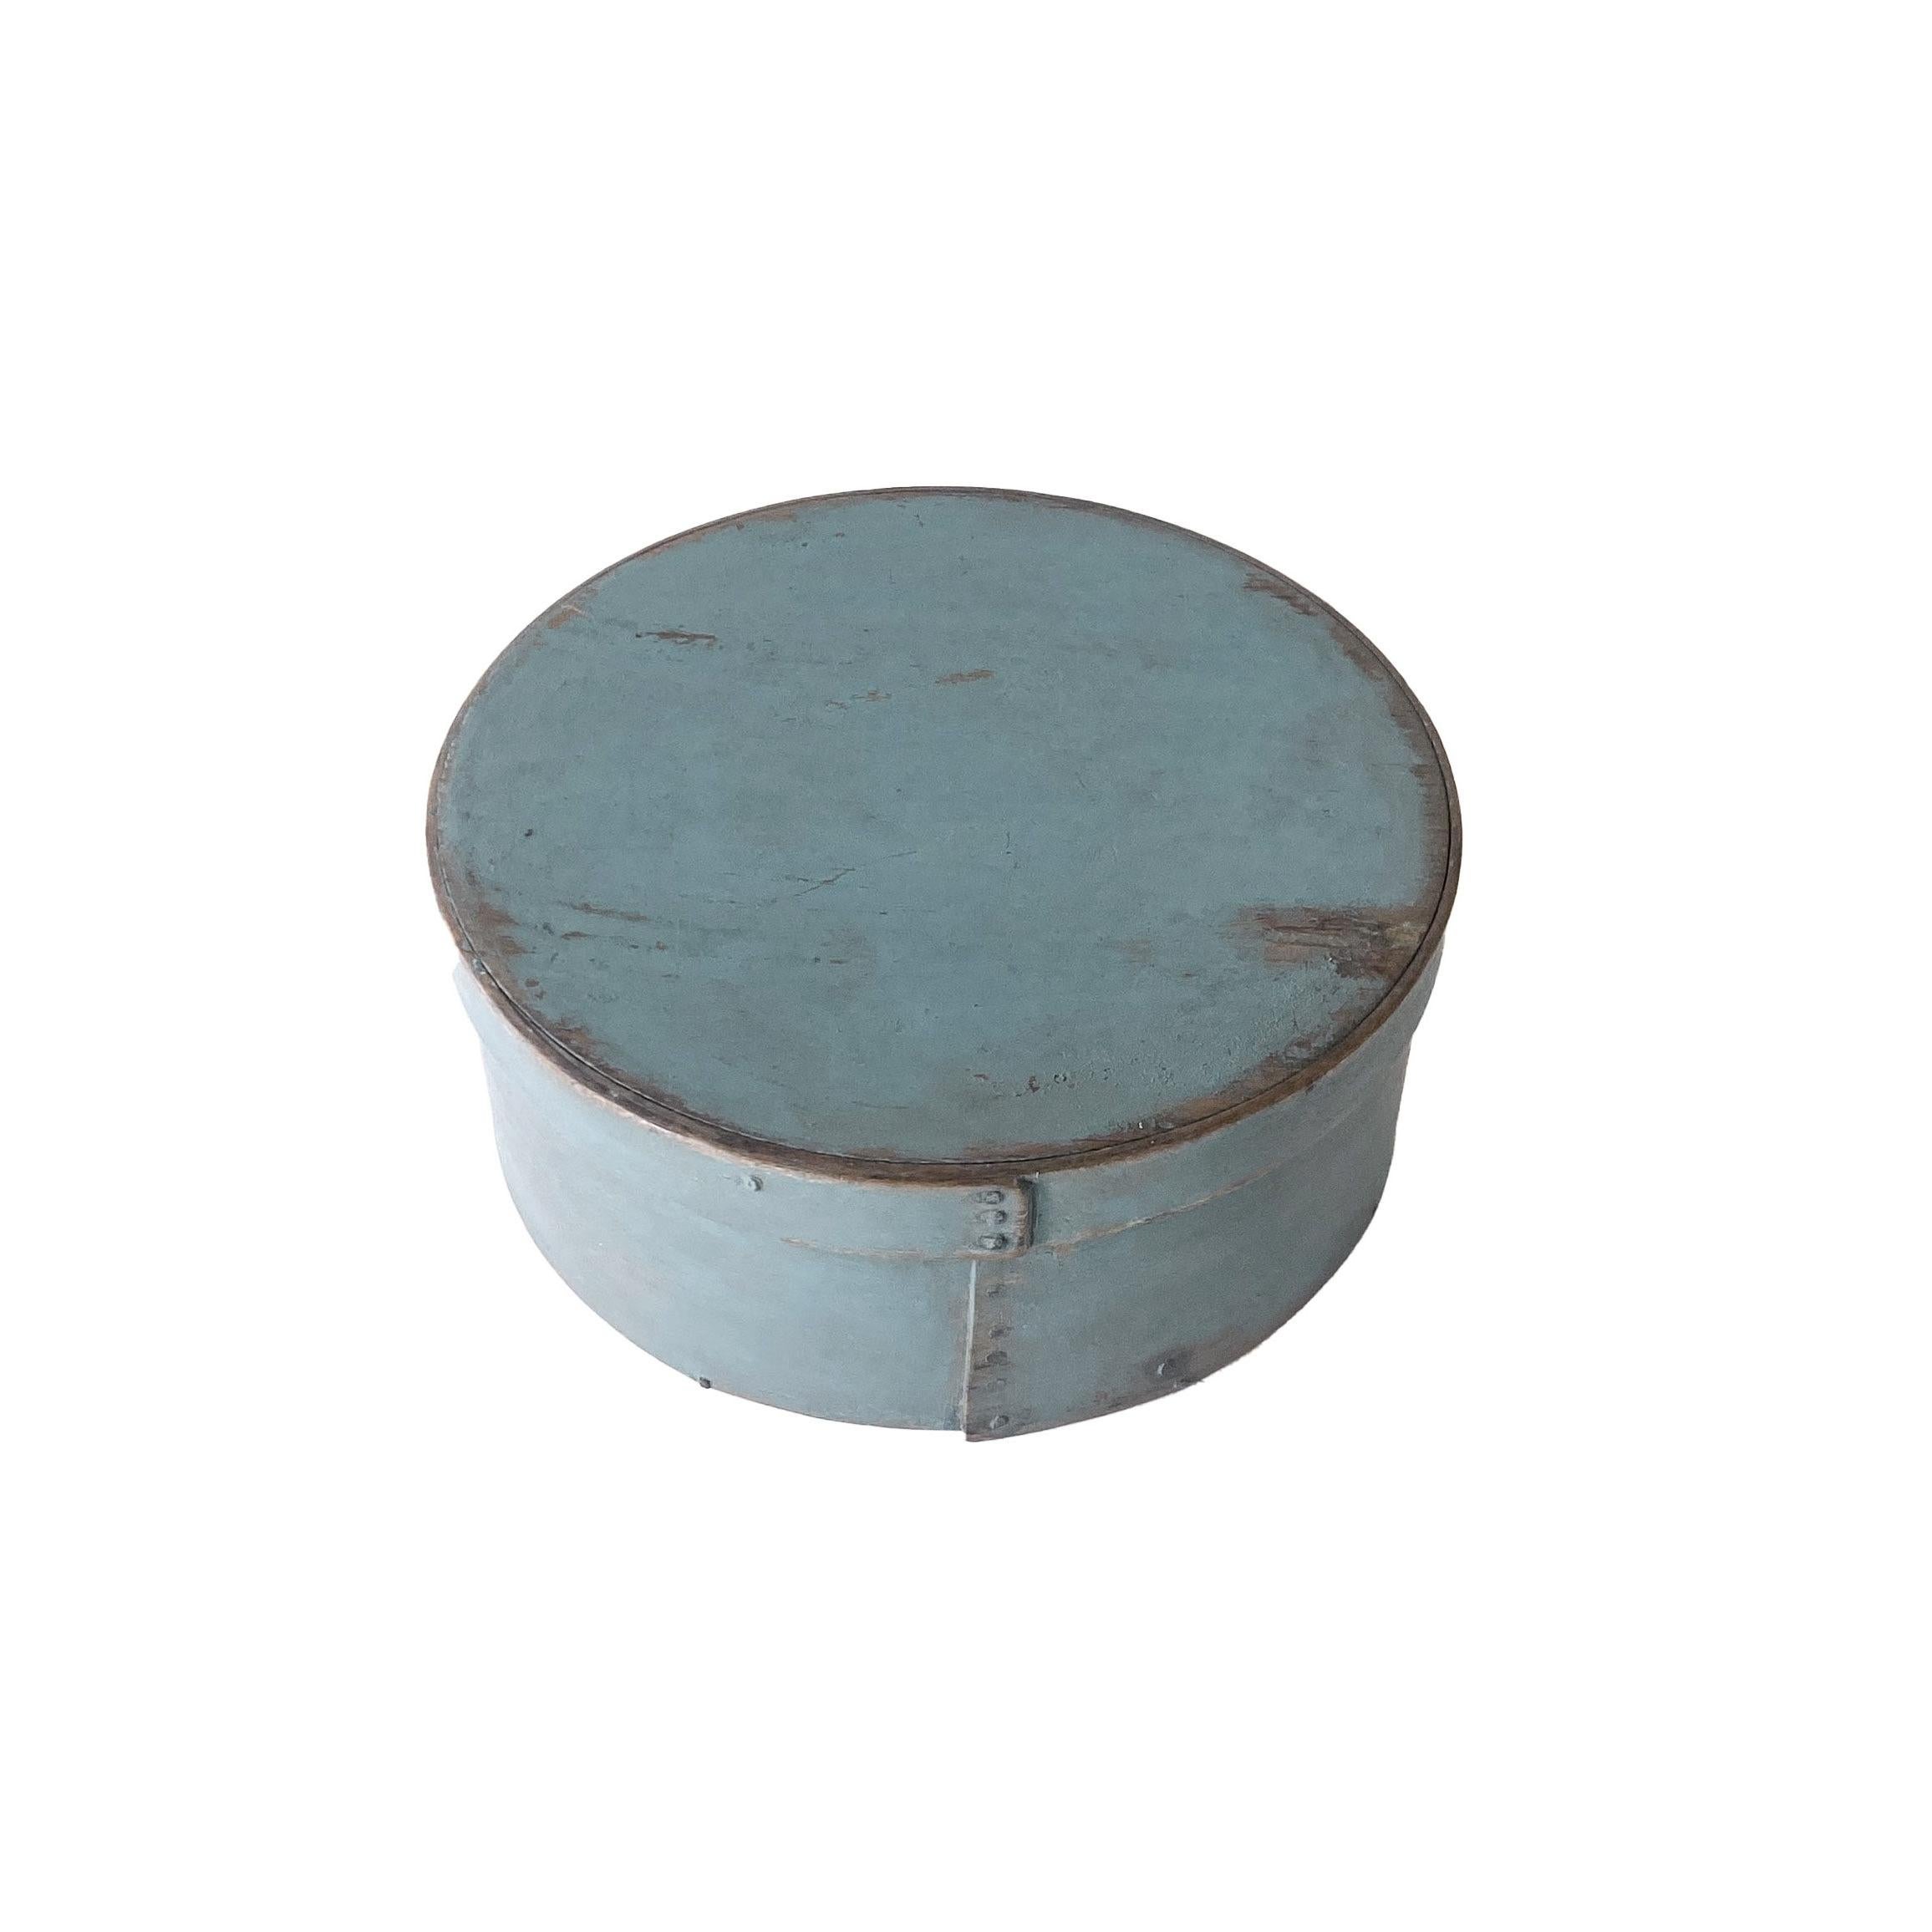 Round bentwood box made out of pine with lapped seams and iron 
tacks, retaining its original robin egg blue paint
Good condition with appropriate edge wear
American, circa 1850.